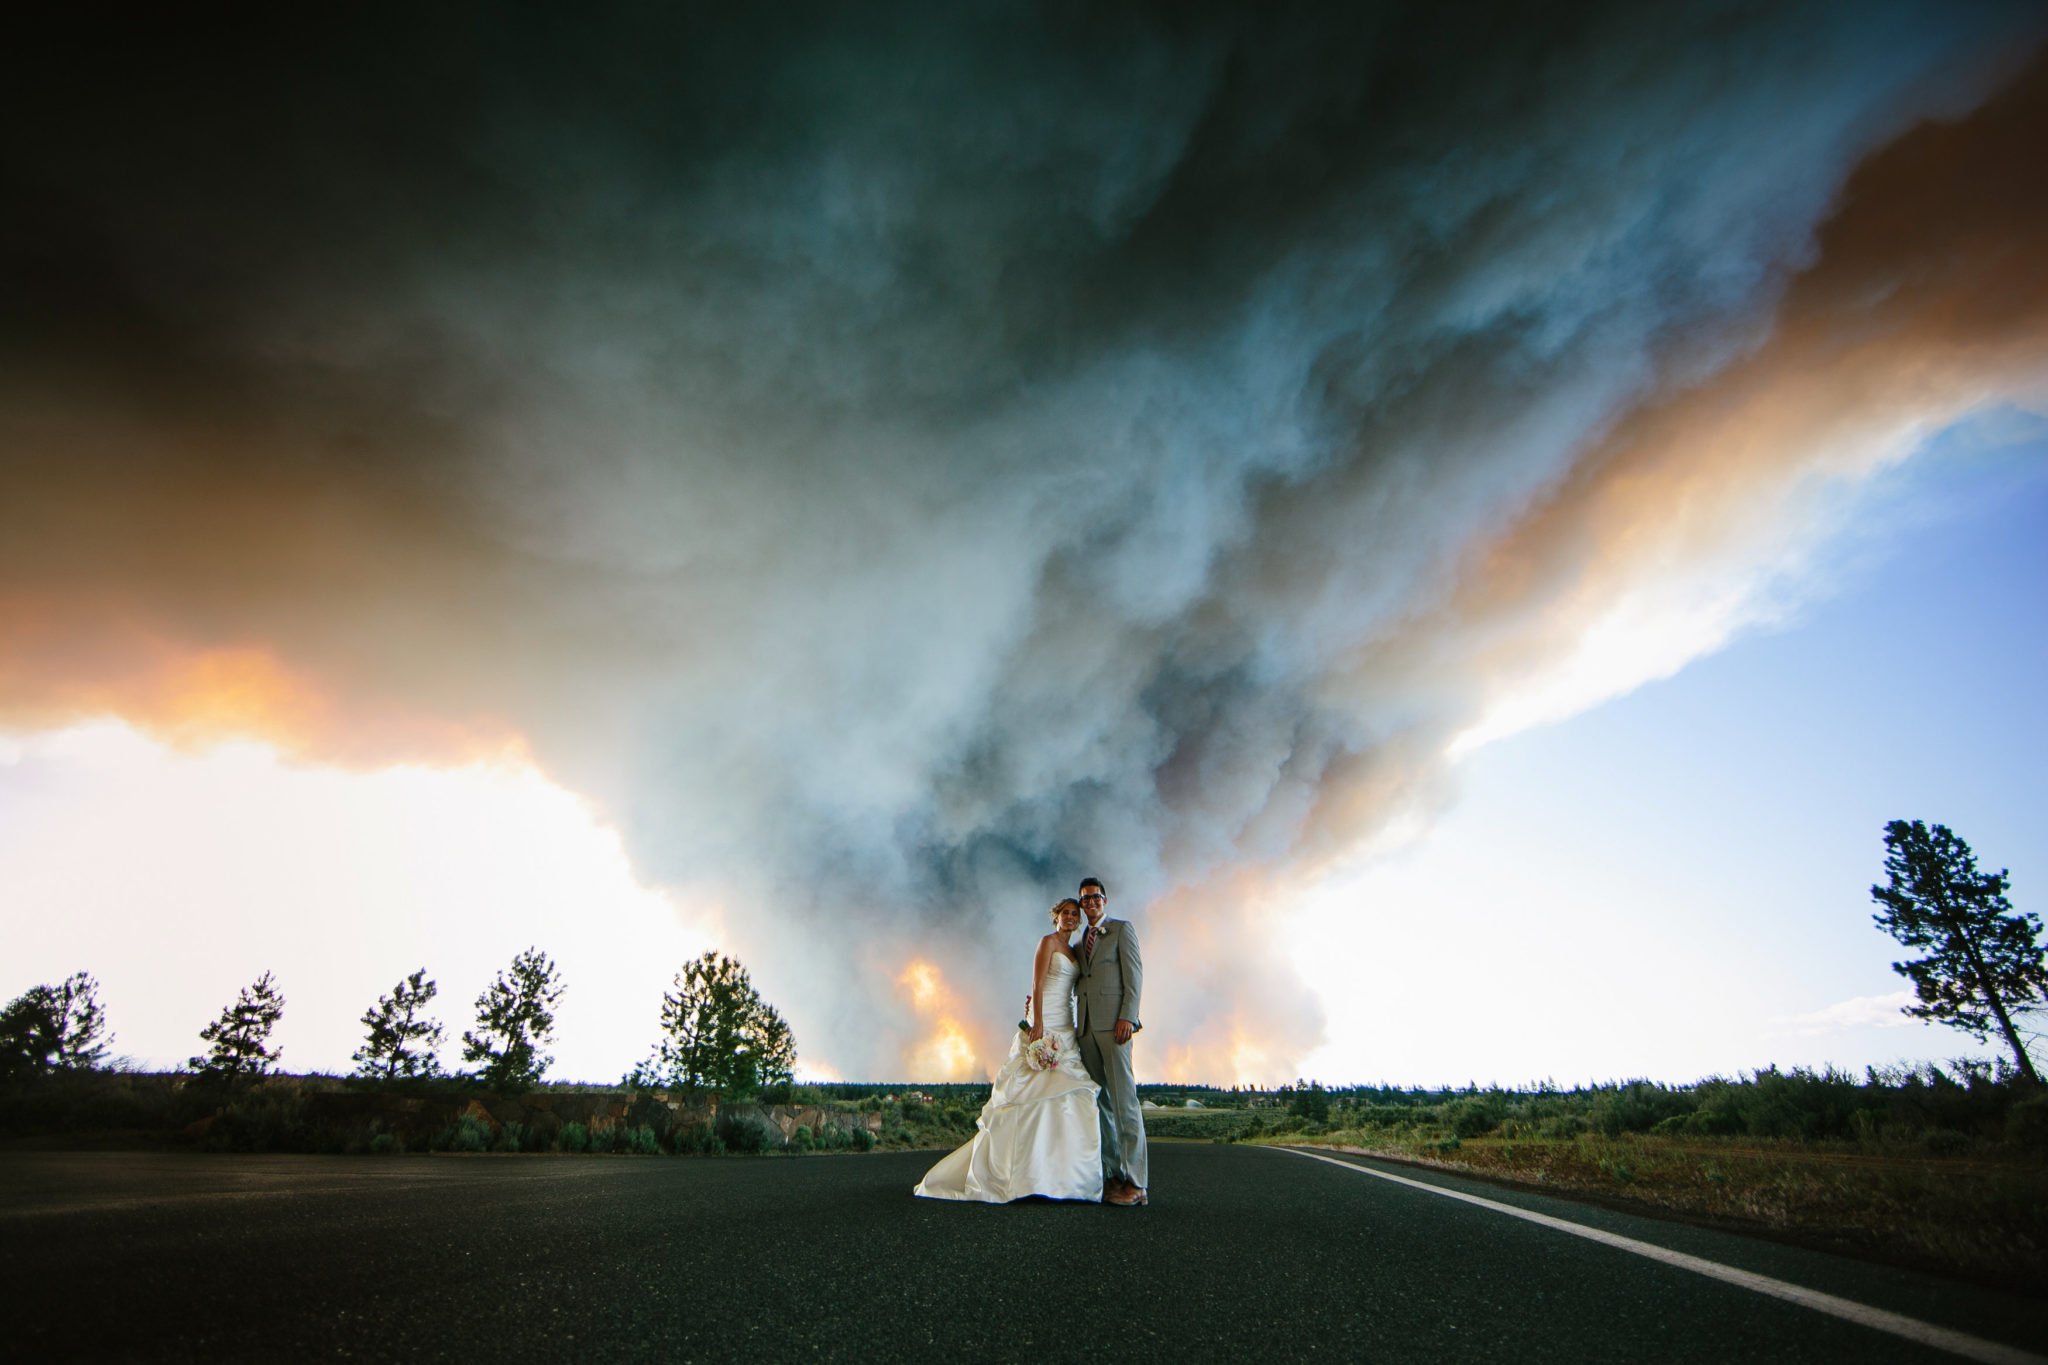 Wedding Photographer Turns Approaching Wildfire into Newlyweds' Photographic Gold - The Phoblographer